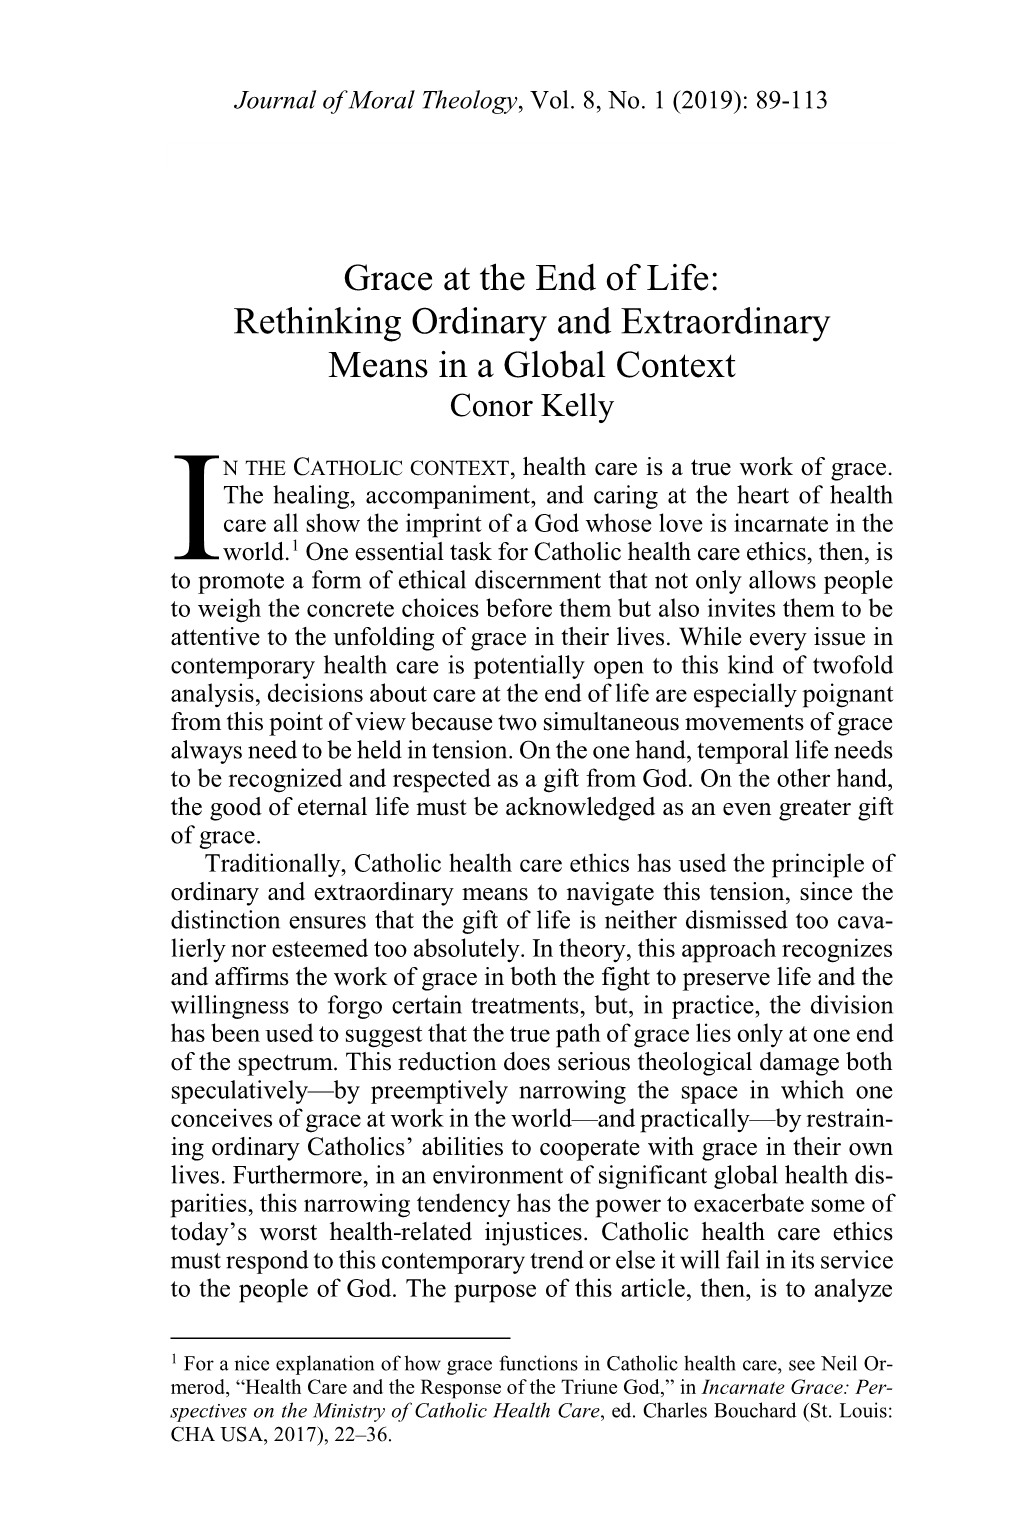 Grace at the End of Life: Rethinking Ordinary and Extraordinary Means in a Global Context Conor Kelly